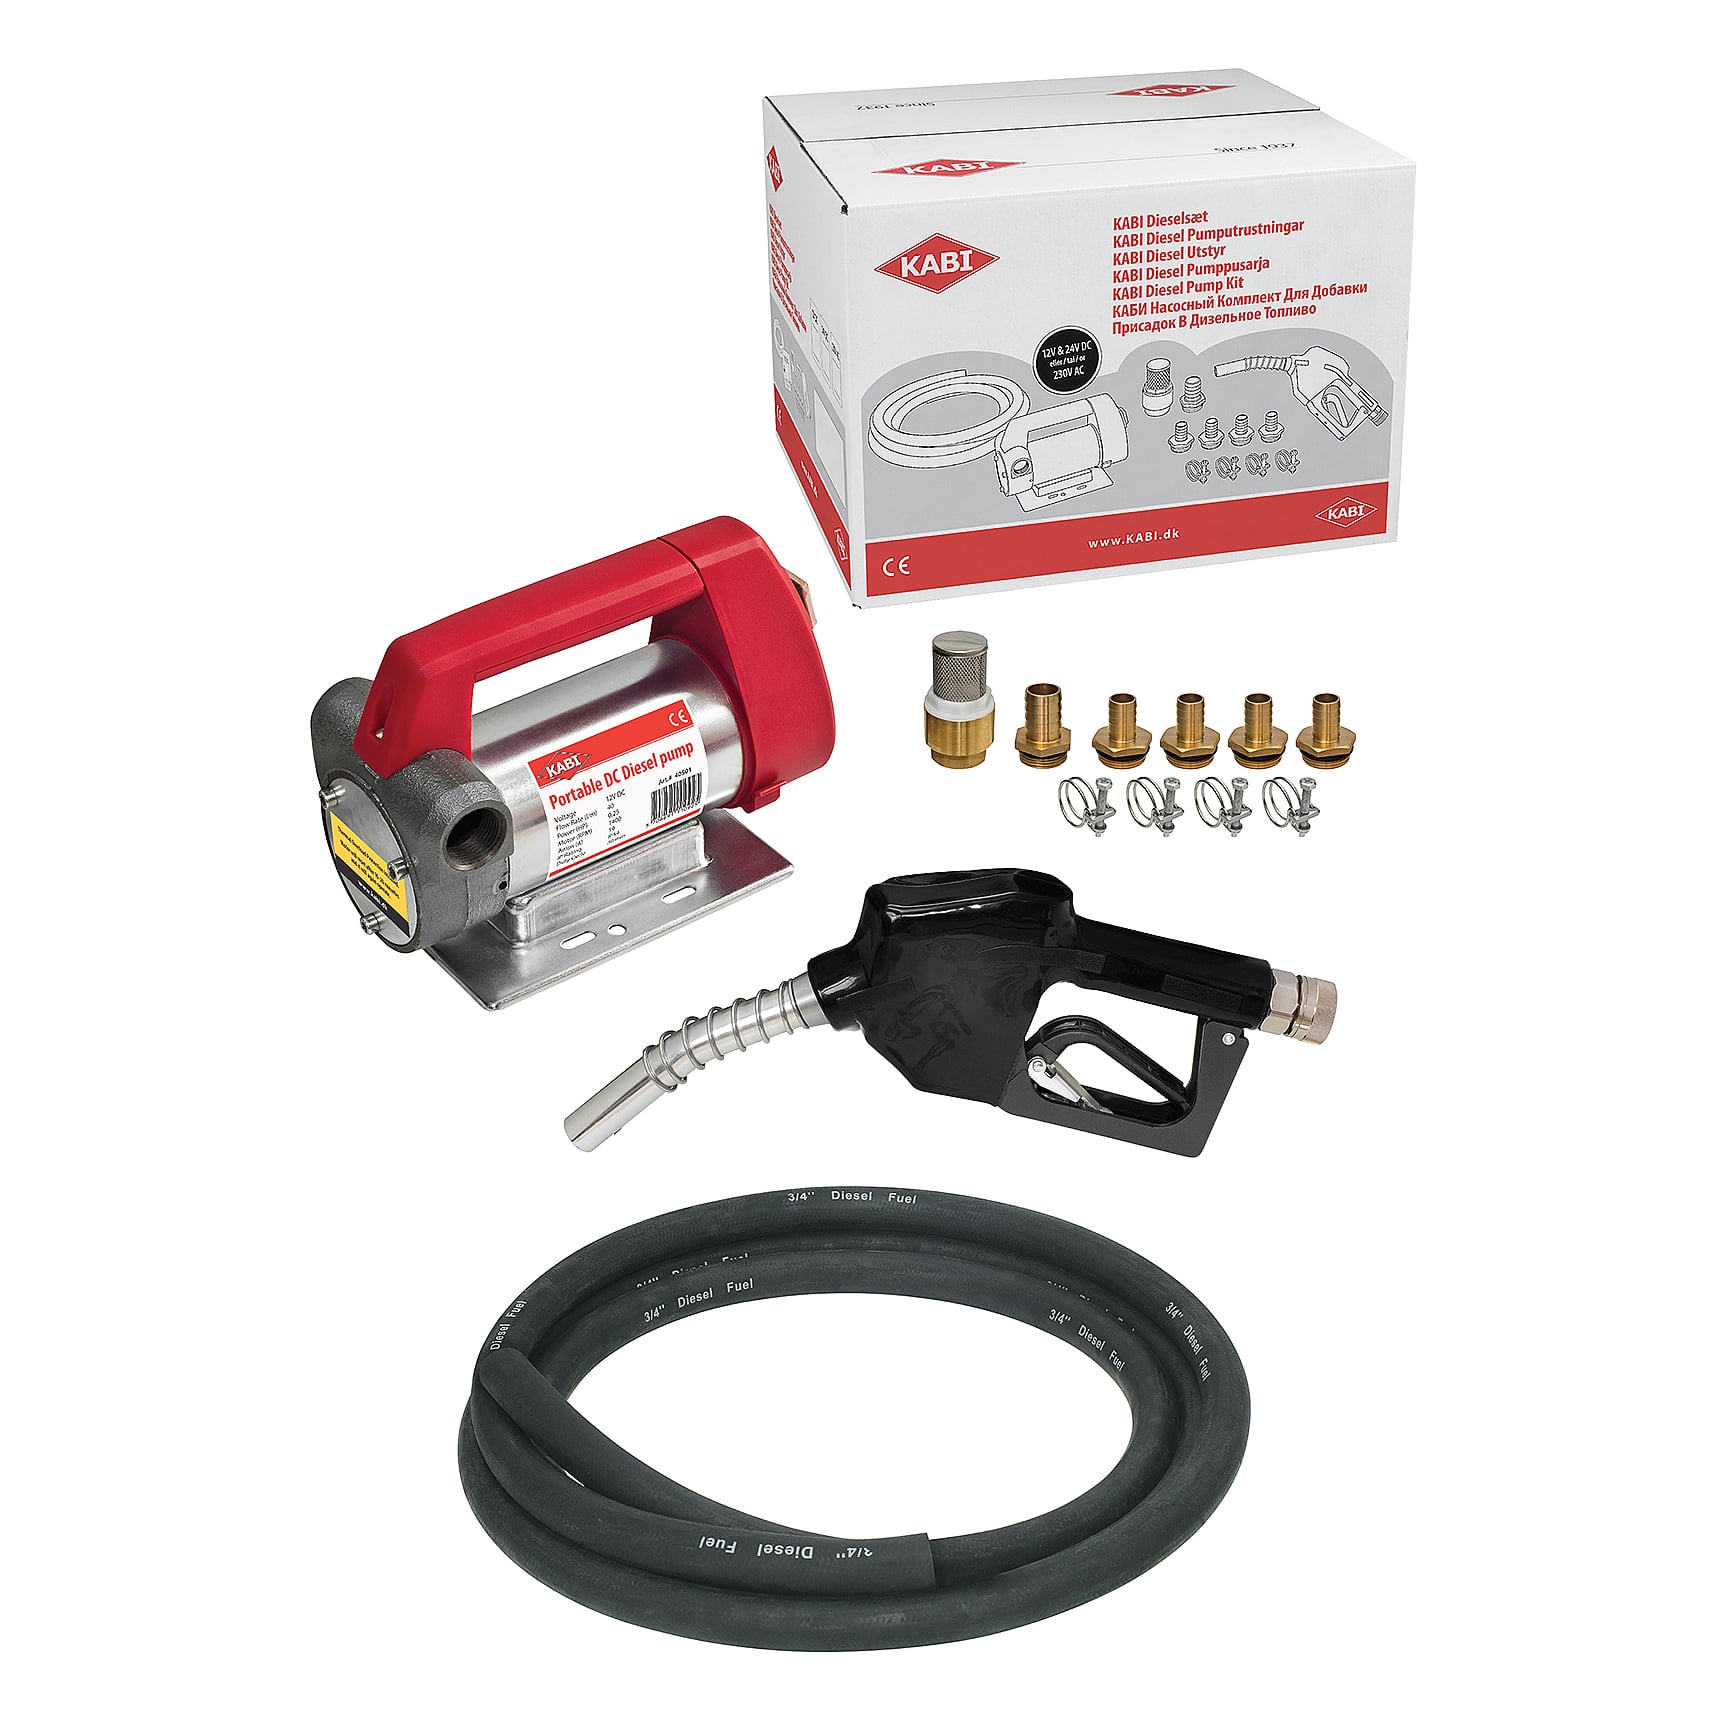 KABI Electric pump kit for diesel and heating oil incl. automatic nozzle –  Fedtudstyr, Olieudstyr, Centralsmøring